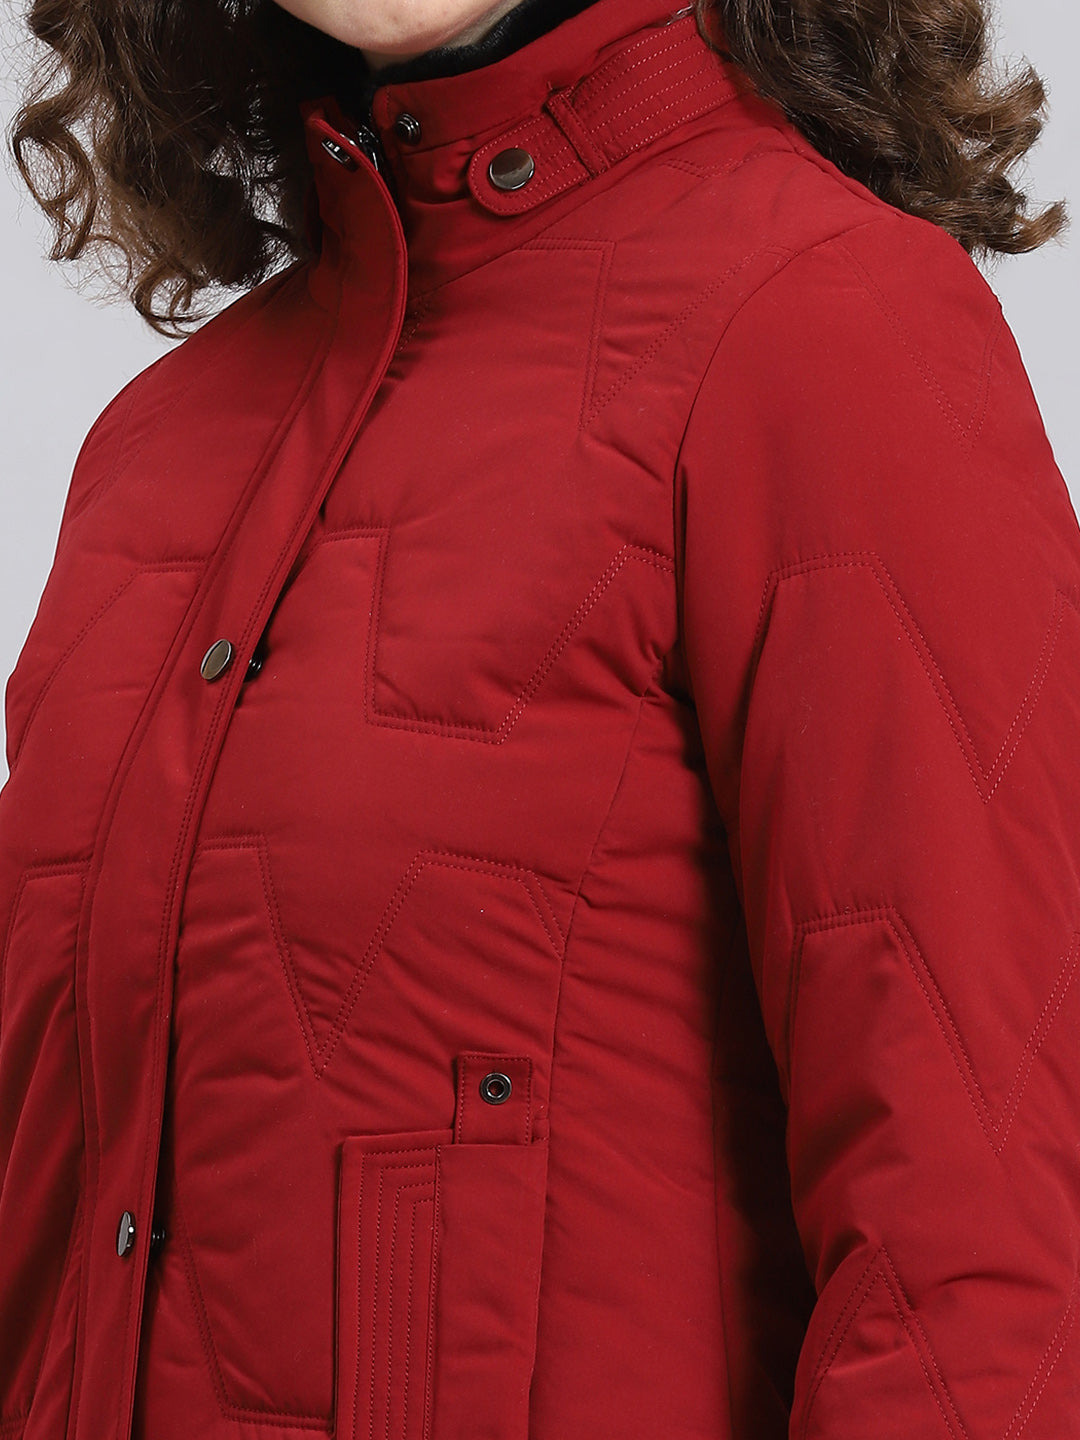 Full Sleeve Red Women's Jackets at Rs 1600/piece in Palwal